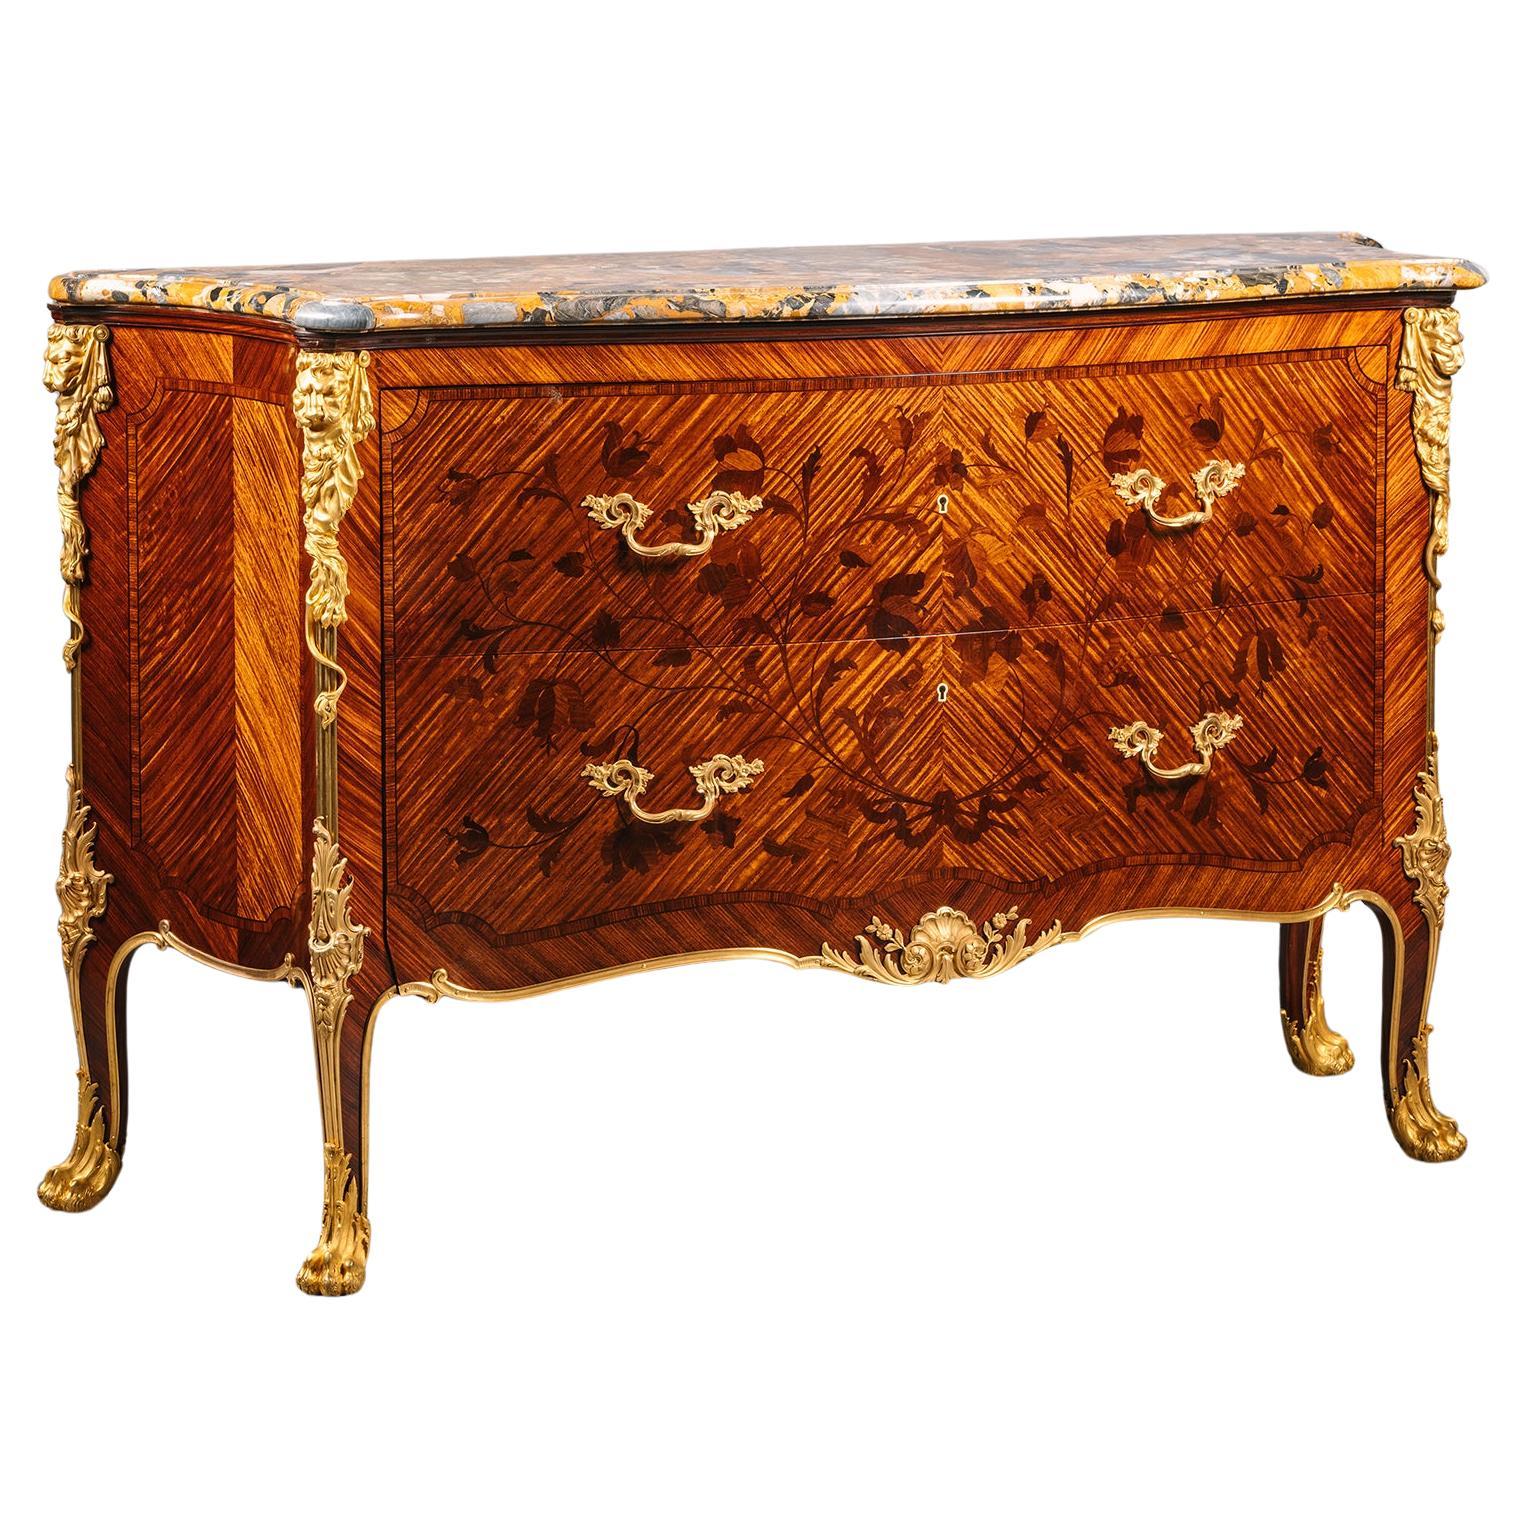 A Gilt-Bronze Mounted Marquetry Commode, By Heinrich Pallenberg, Cologne